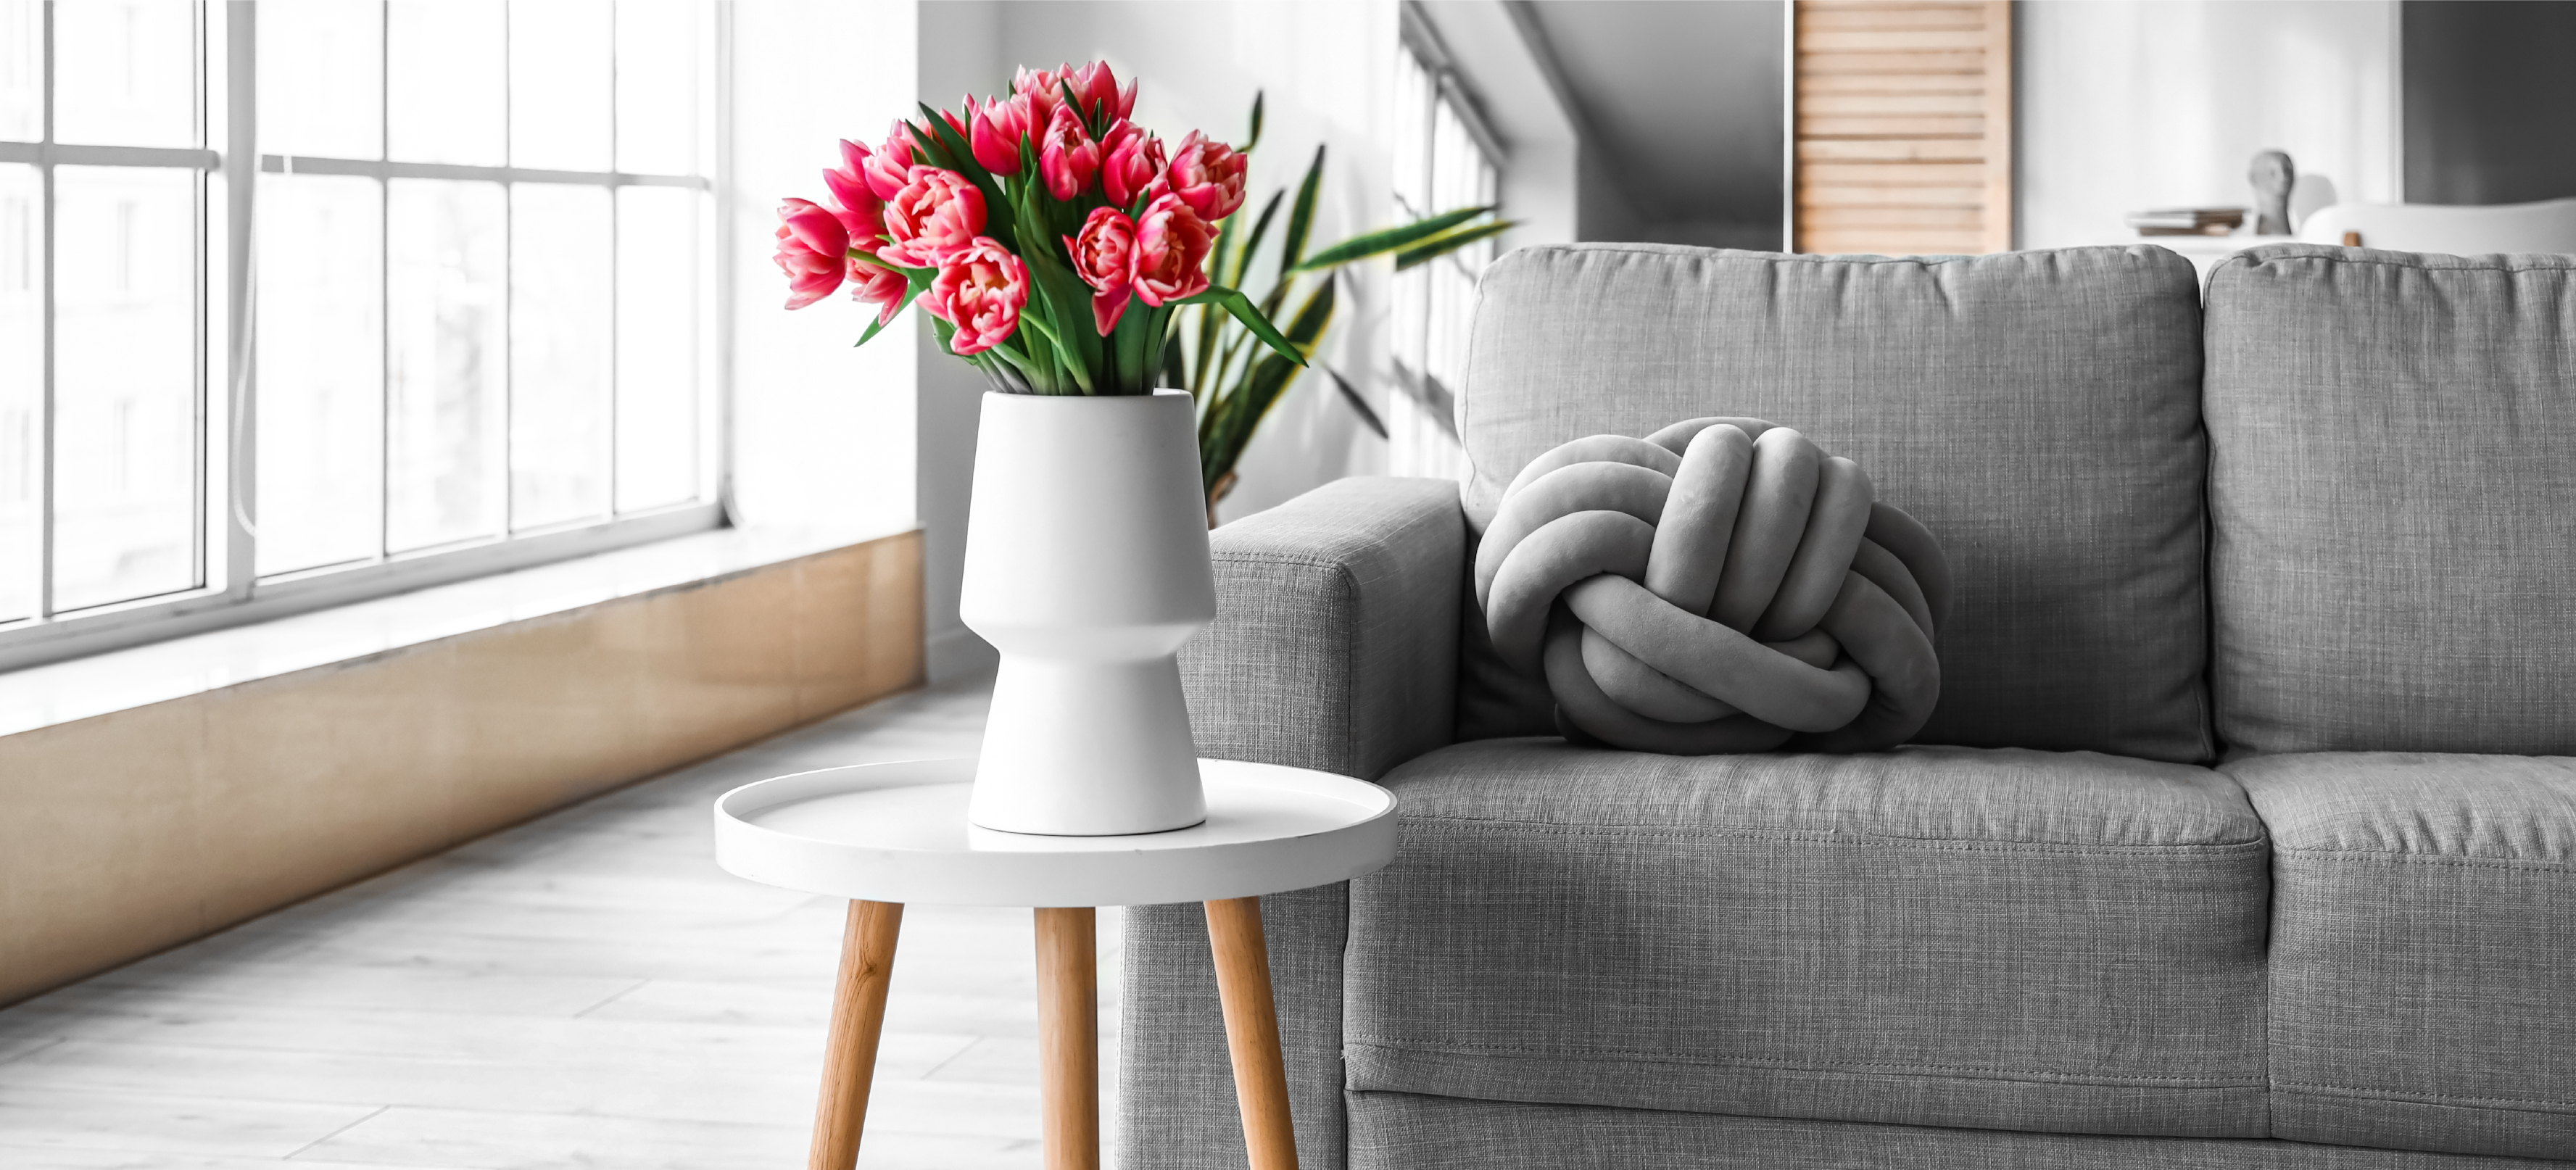 How to Bring Style and Sophistication to Your Home with Flower Vases